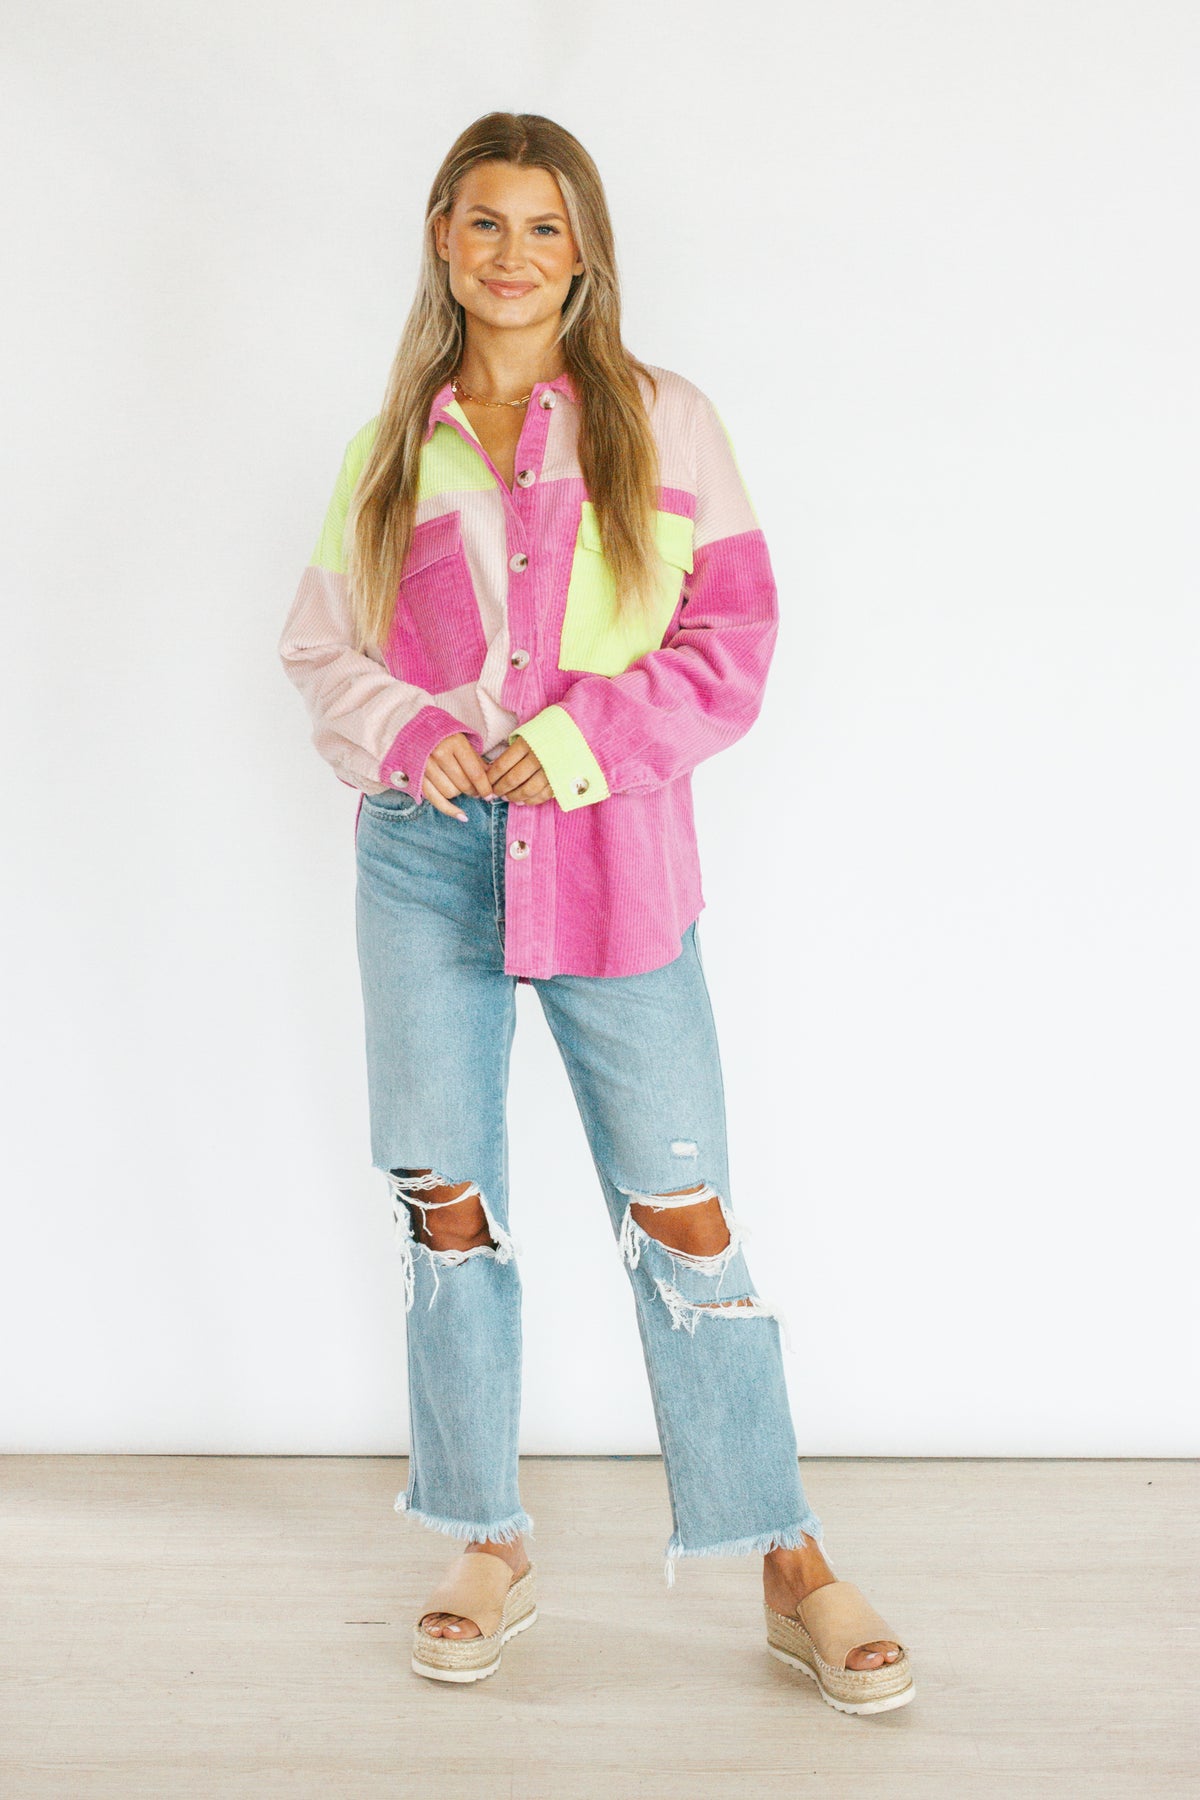 Apricot Lane Louisville - Chillier temps on #Thurby mean a denim jacket is  an easy #musthave for staying warm at the track! Pair with fun accessories  for chic southern style! #shoplocal #derbyweek #